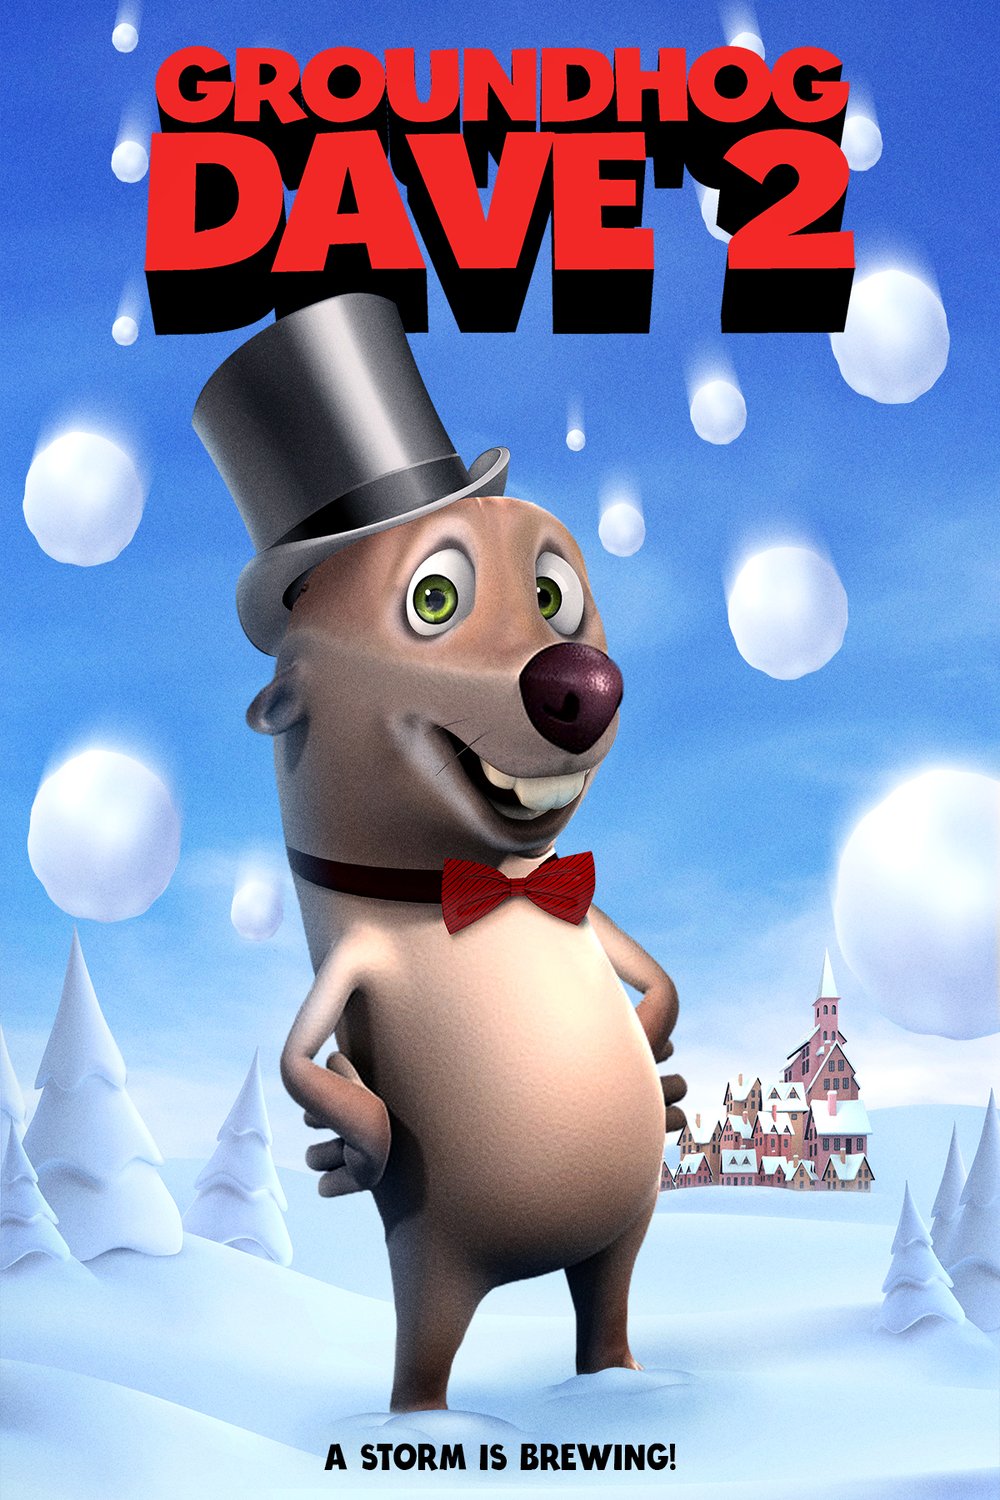 Poster of the movie Groundhog Dave 2